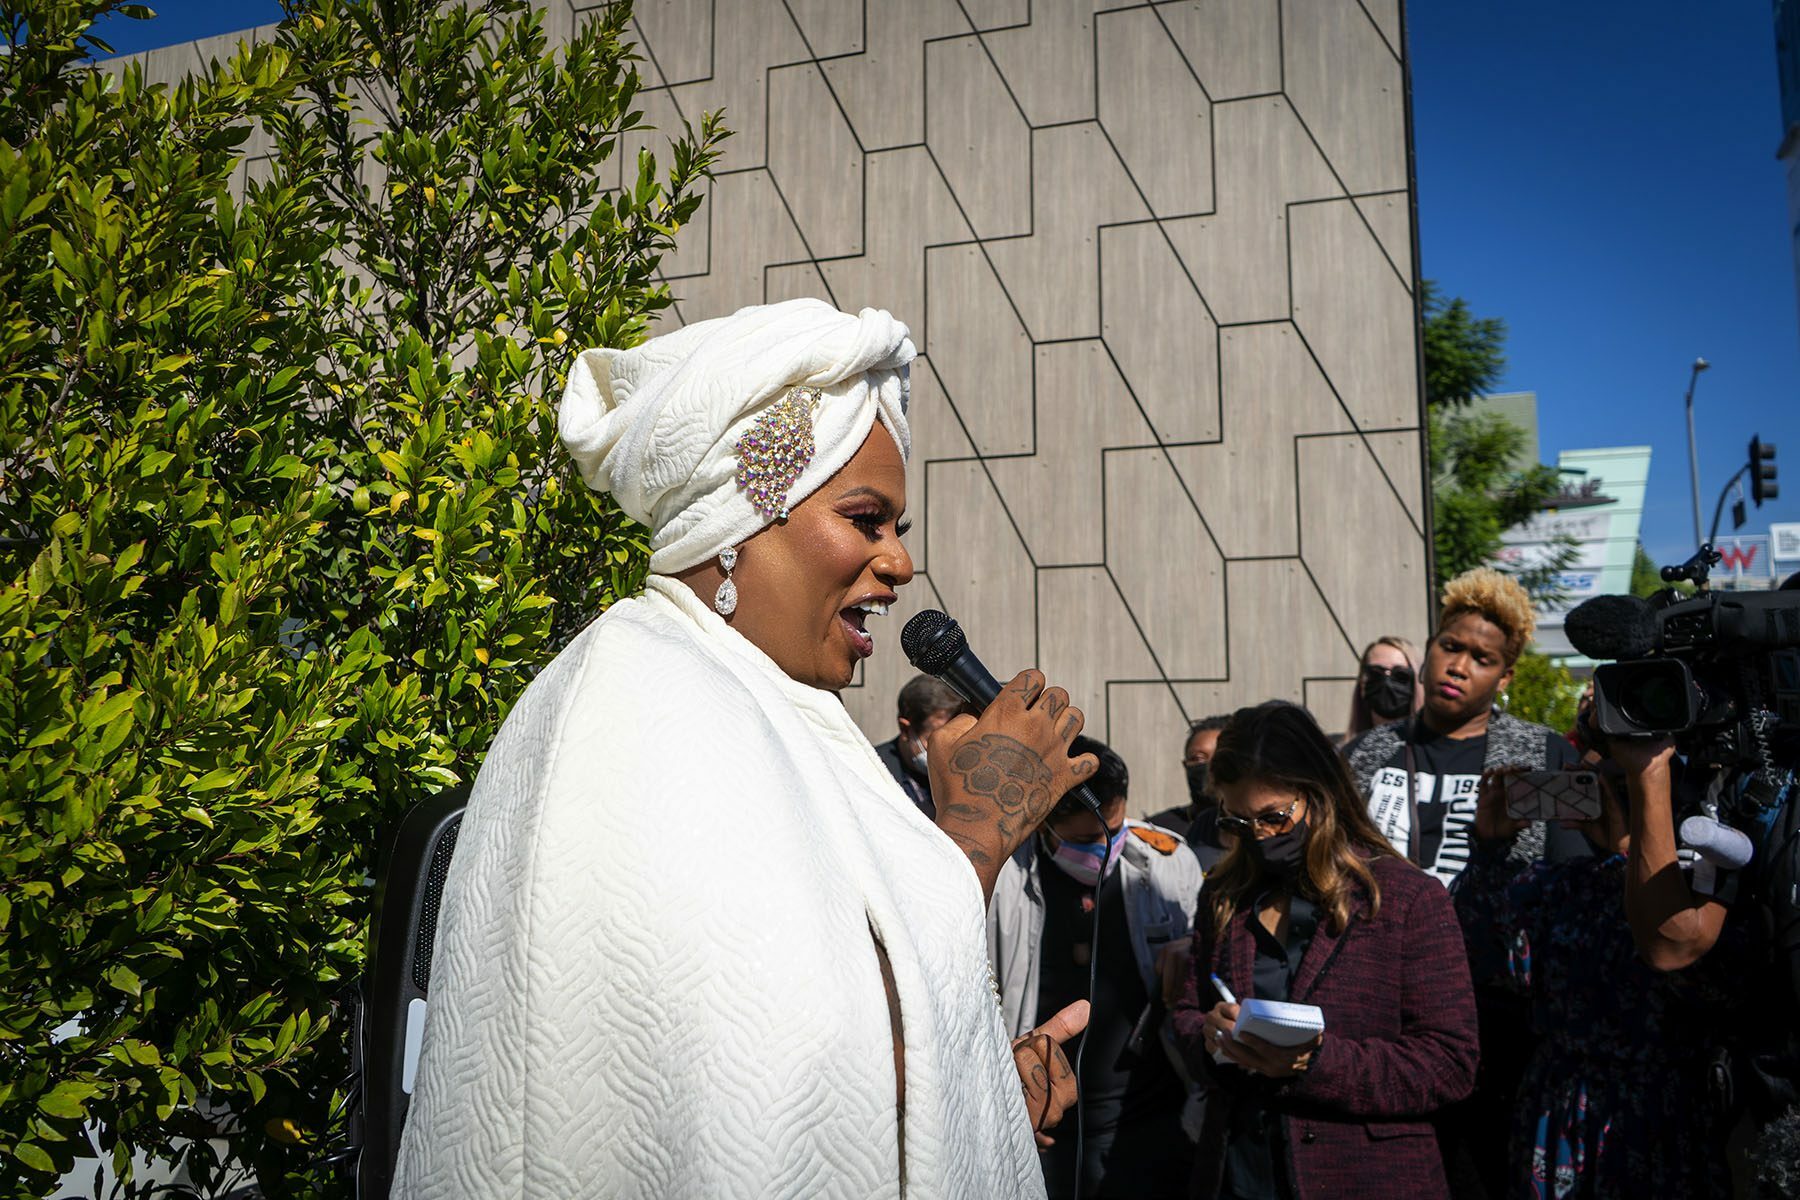 Ashlee Marie Preston dressed in a white cape and a white turban holds a microphone as people and press surround her.